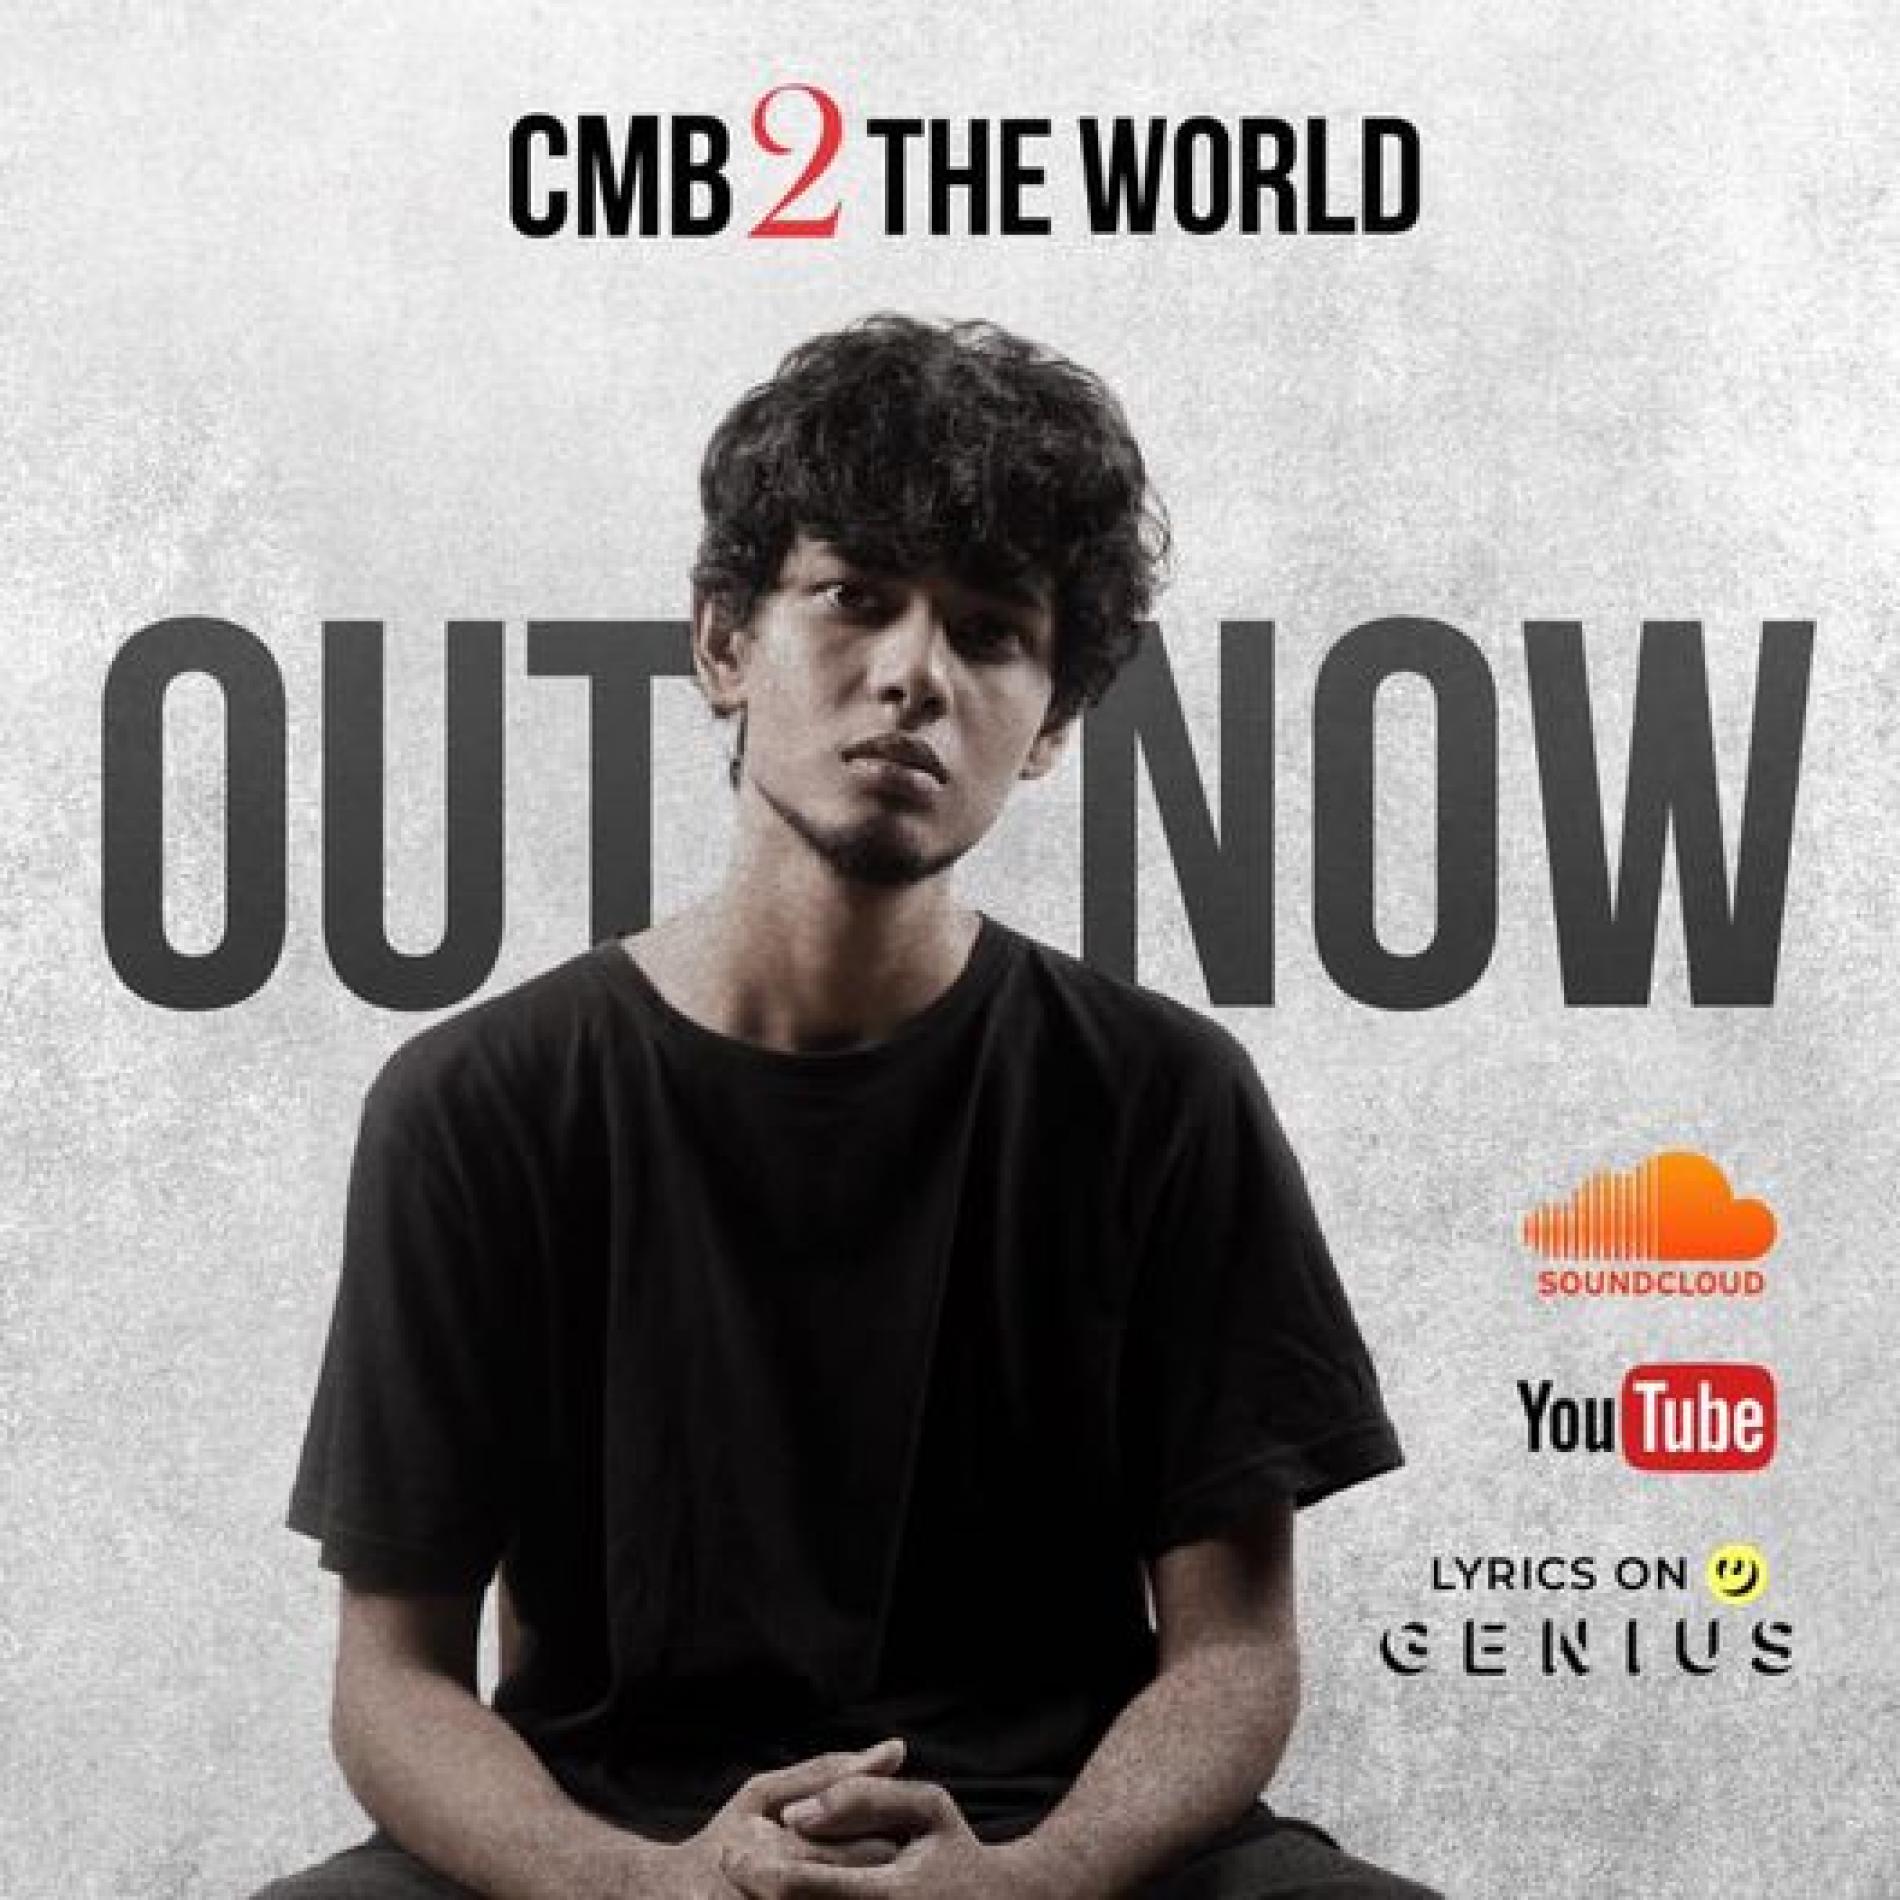 News : KVN Releases CMB 2 The World